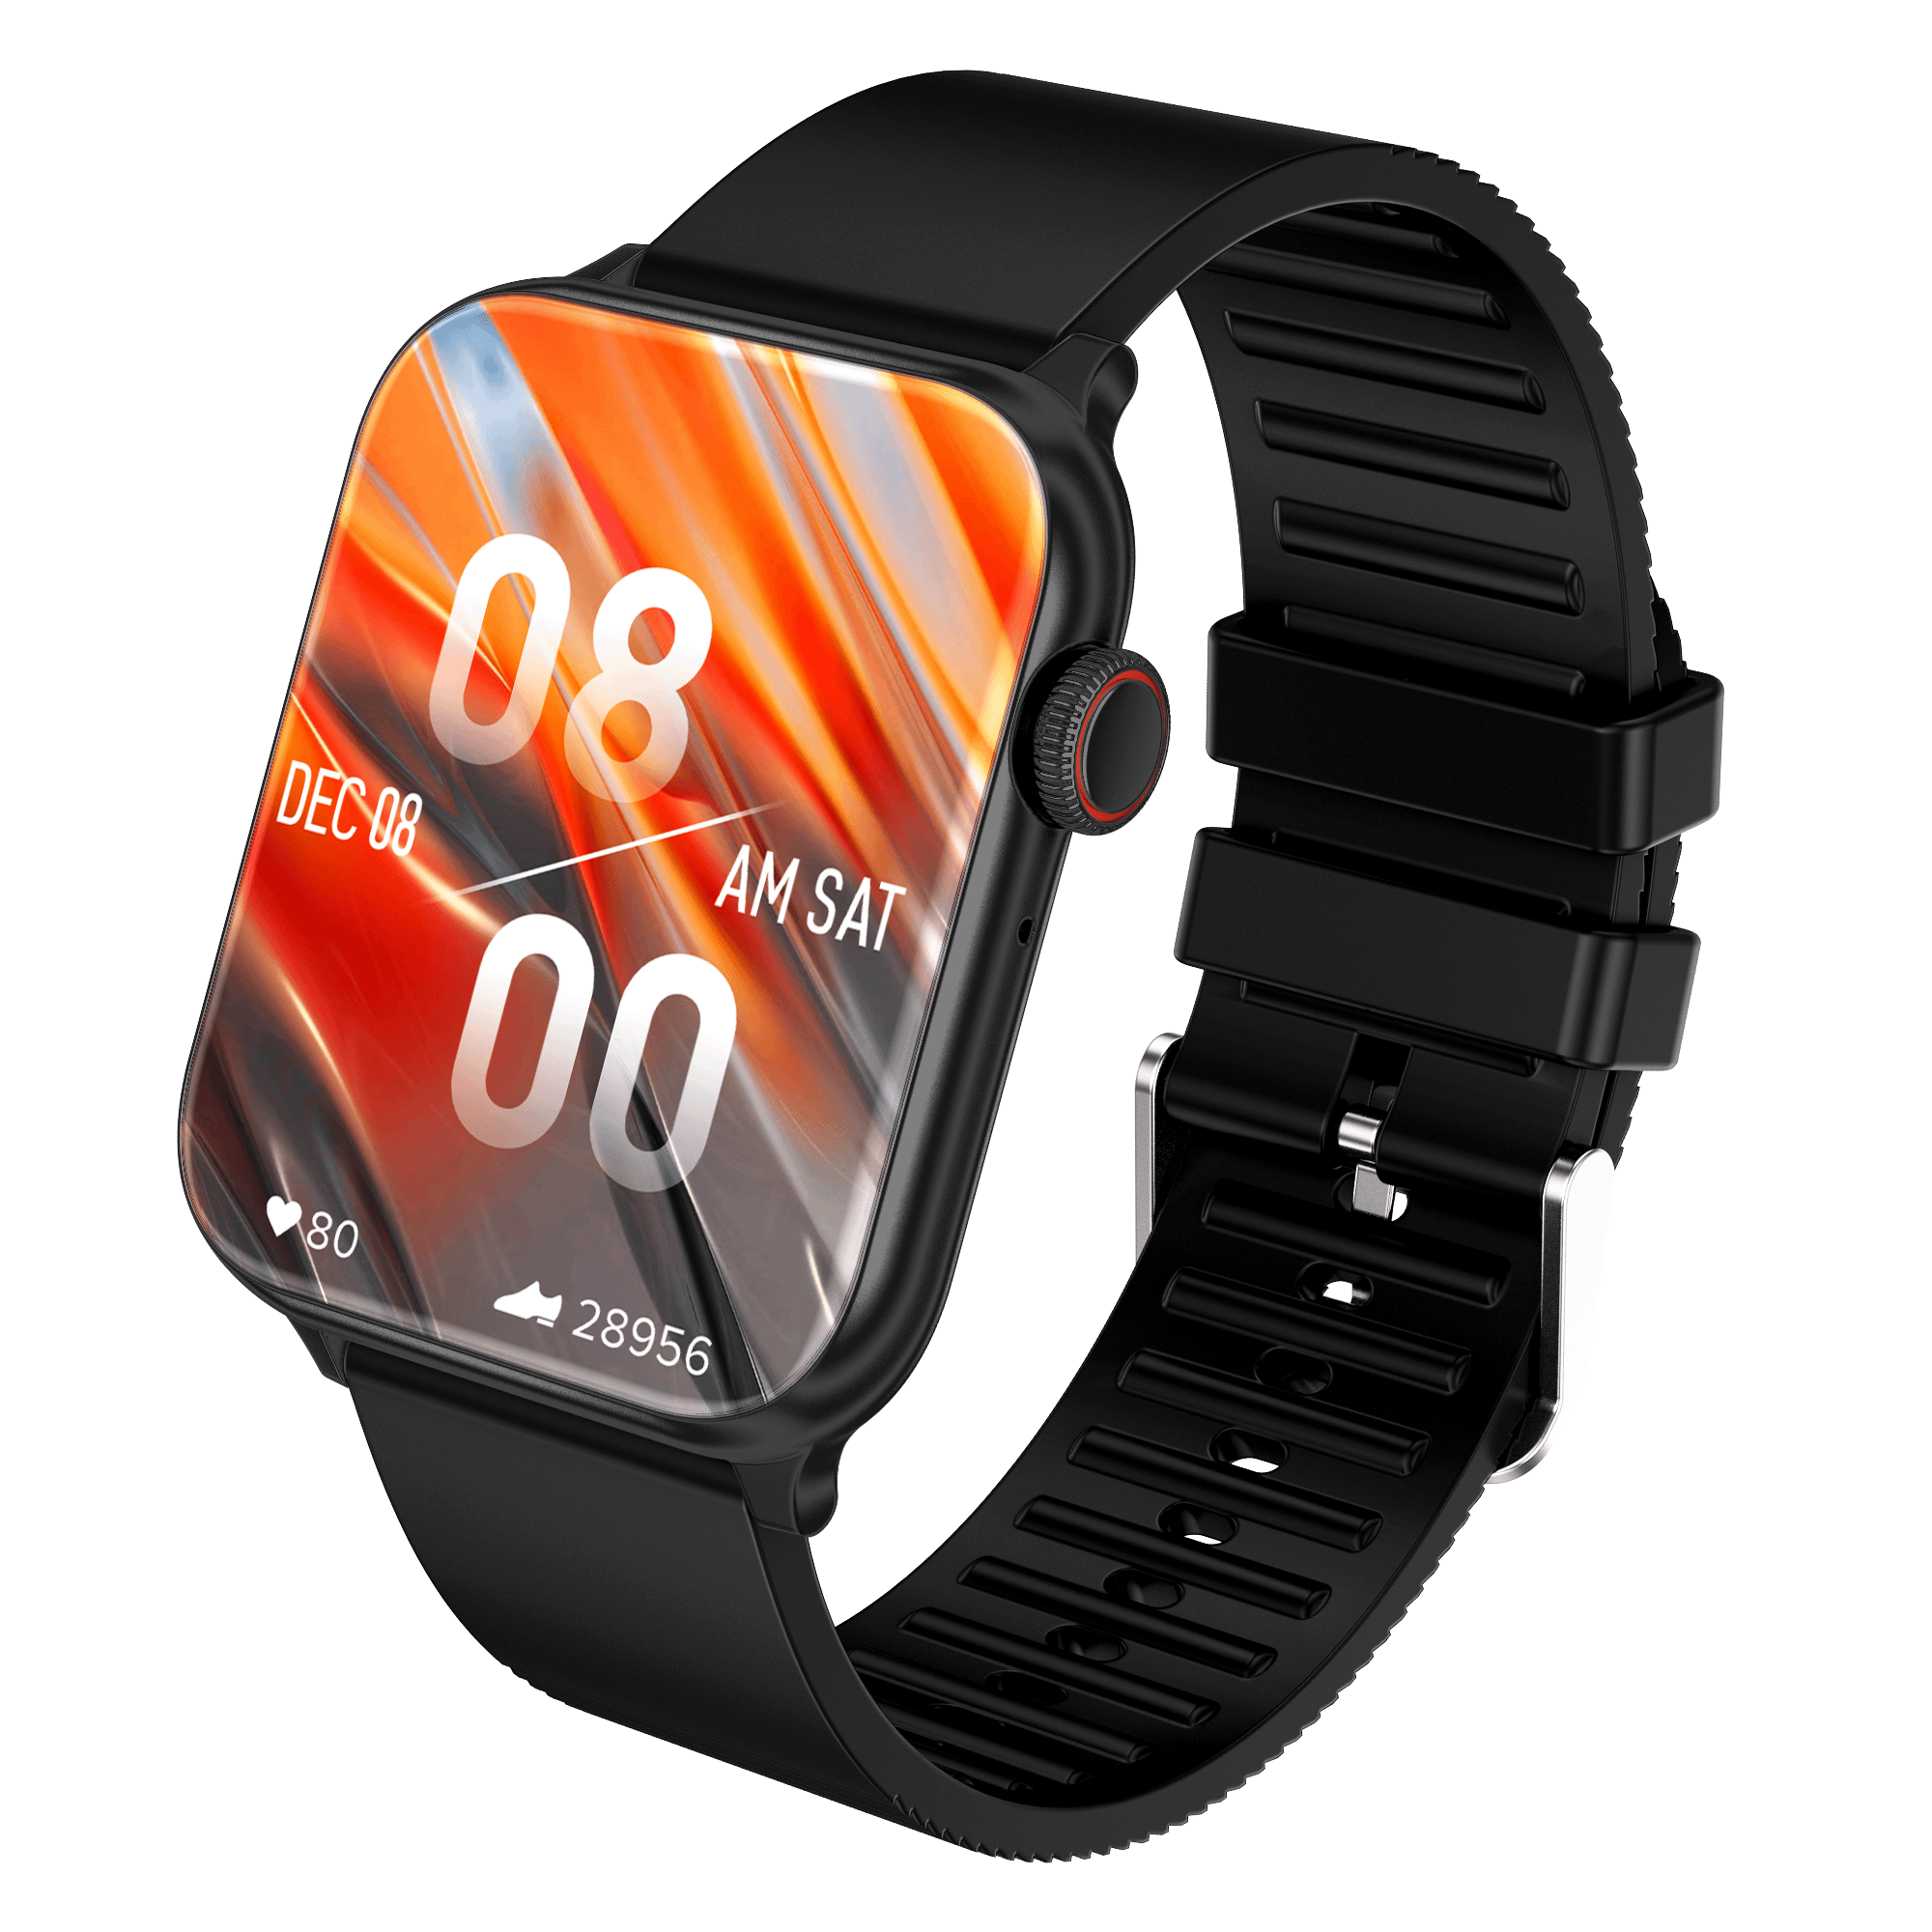 IZI Newly Launched Prime+ Bluetooth Calling Smart Watch, 1.78" AMOLED Display, , DIY Watch Face Studio, AI Voice Assistant, Inbuilt Games, 200+ Sports Mode, Rotating Crown, Health Tracking Monitor